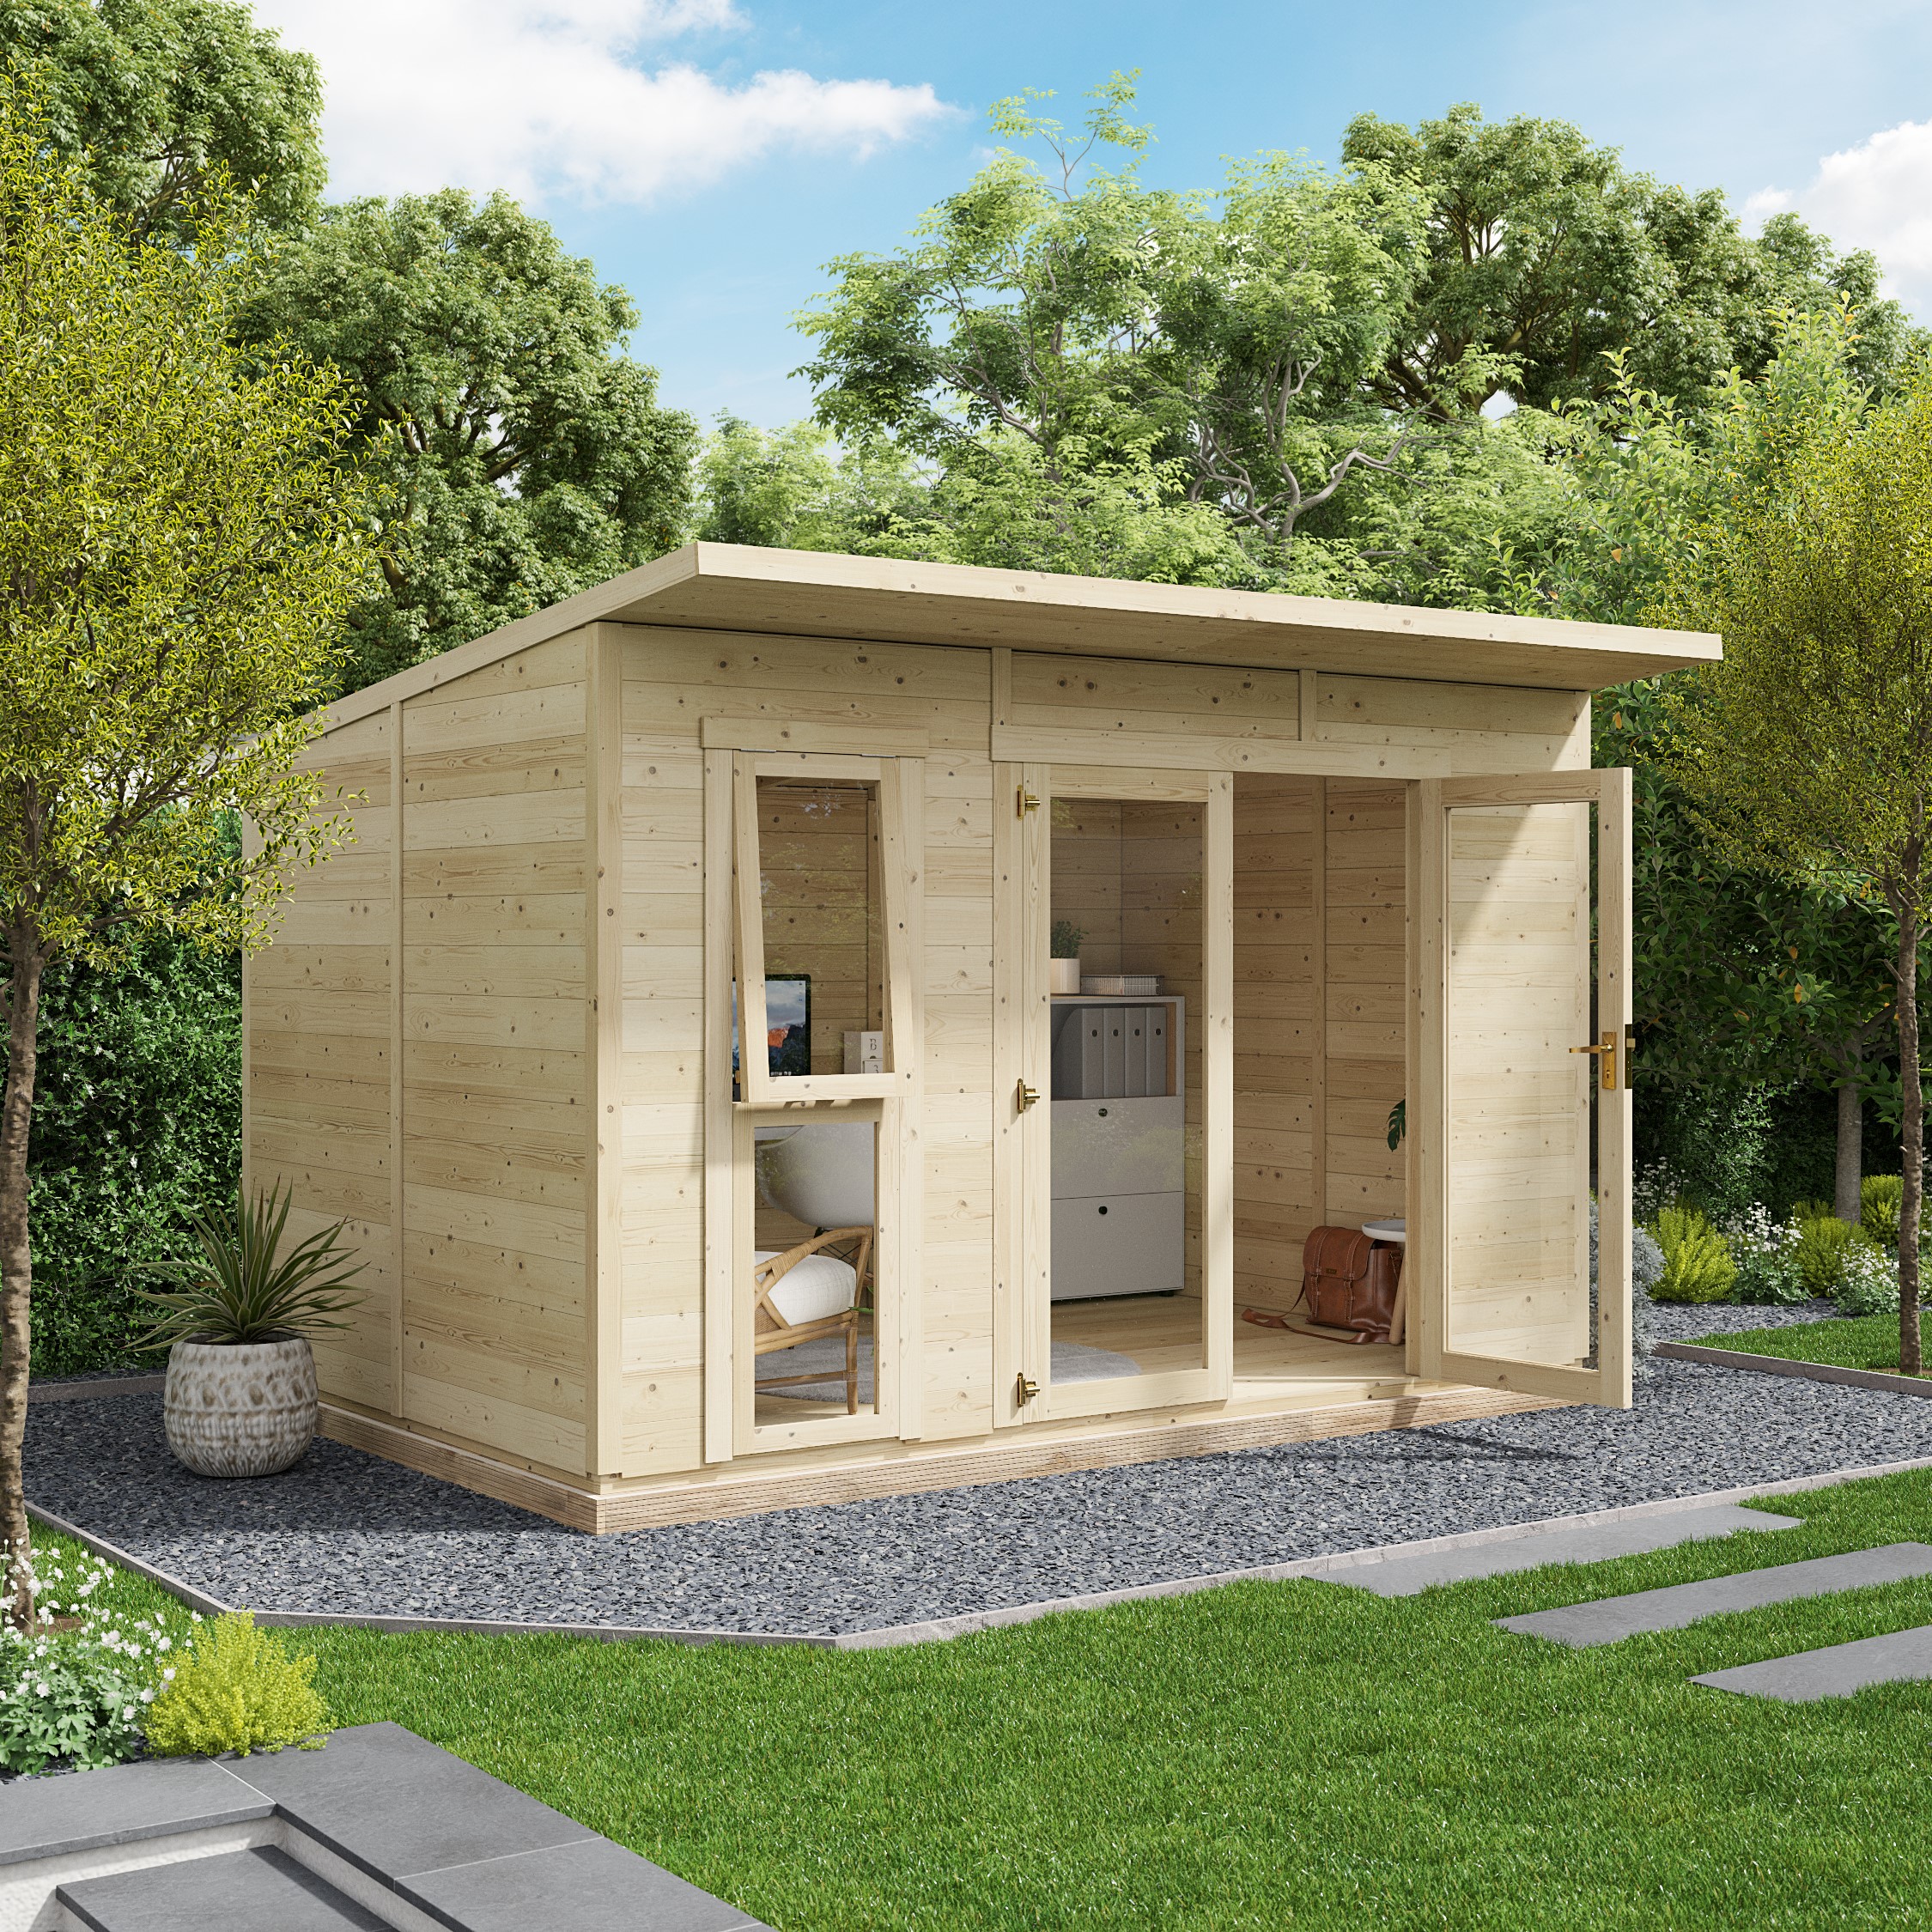 BillyOh Canvas Insulated Building - 12ft x 8ft (3.5x2.5m)